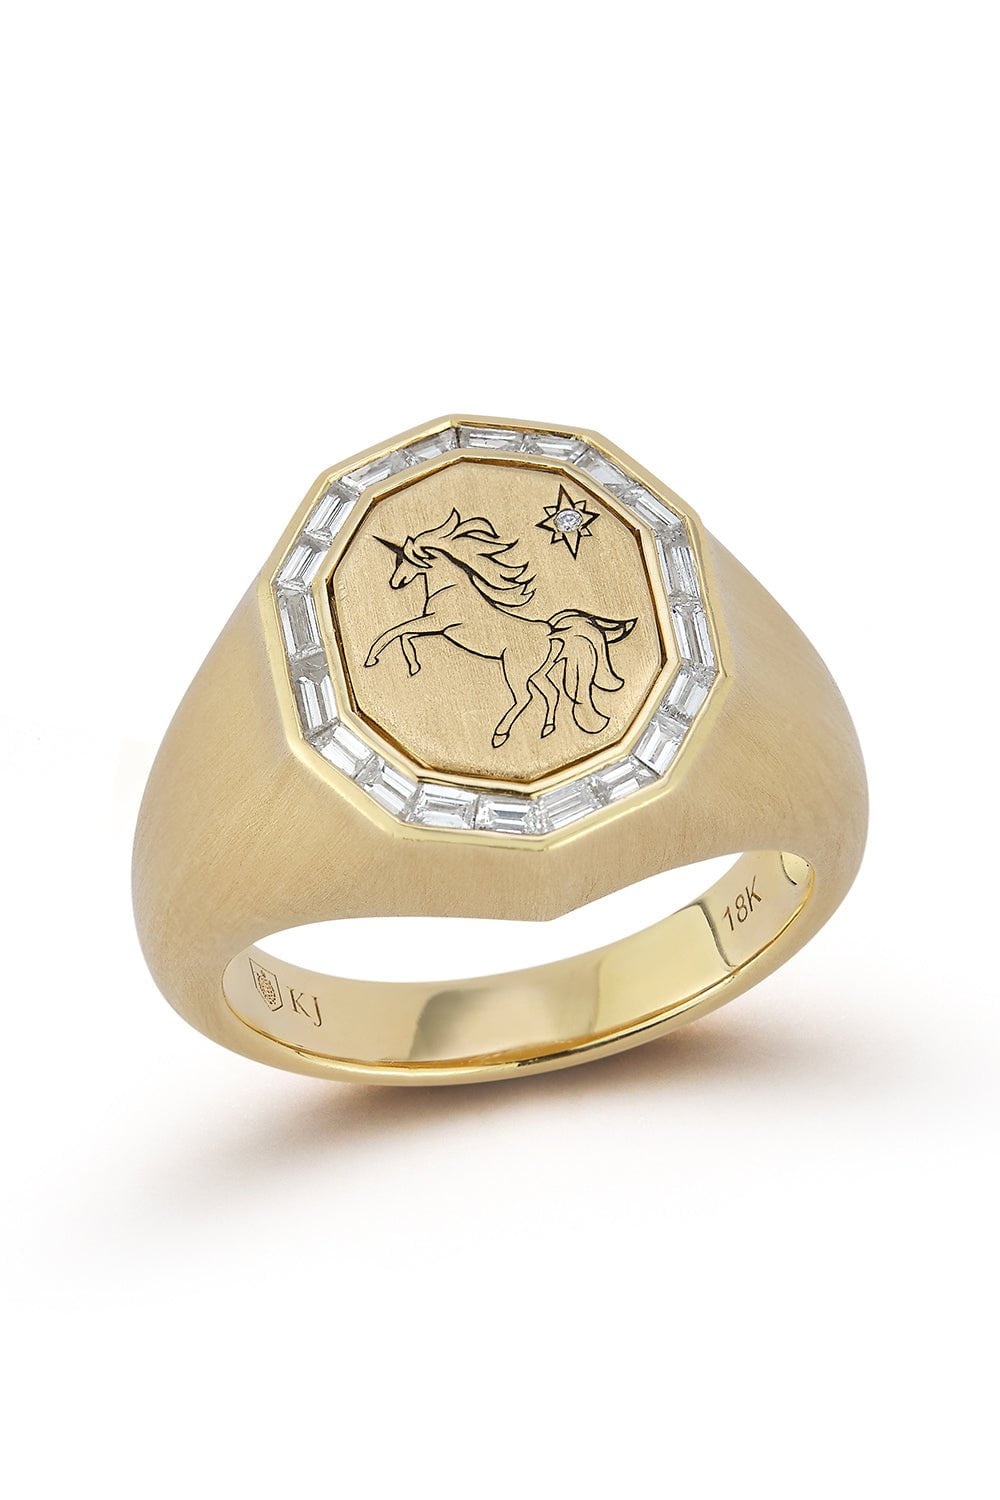 KATHERINE JETTER-The Baguette Unicorn Ring-YELLOW GOLD